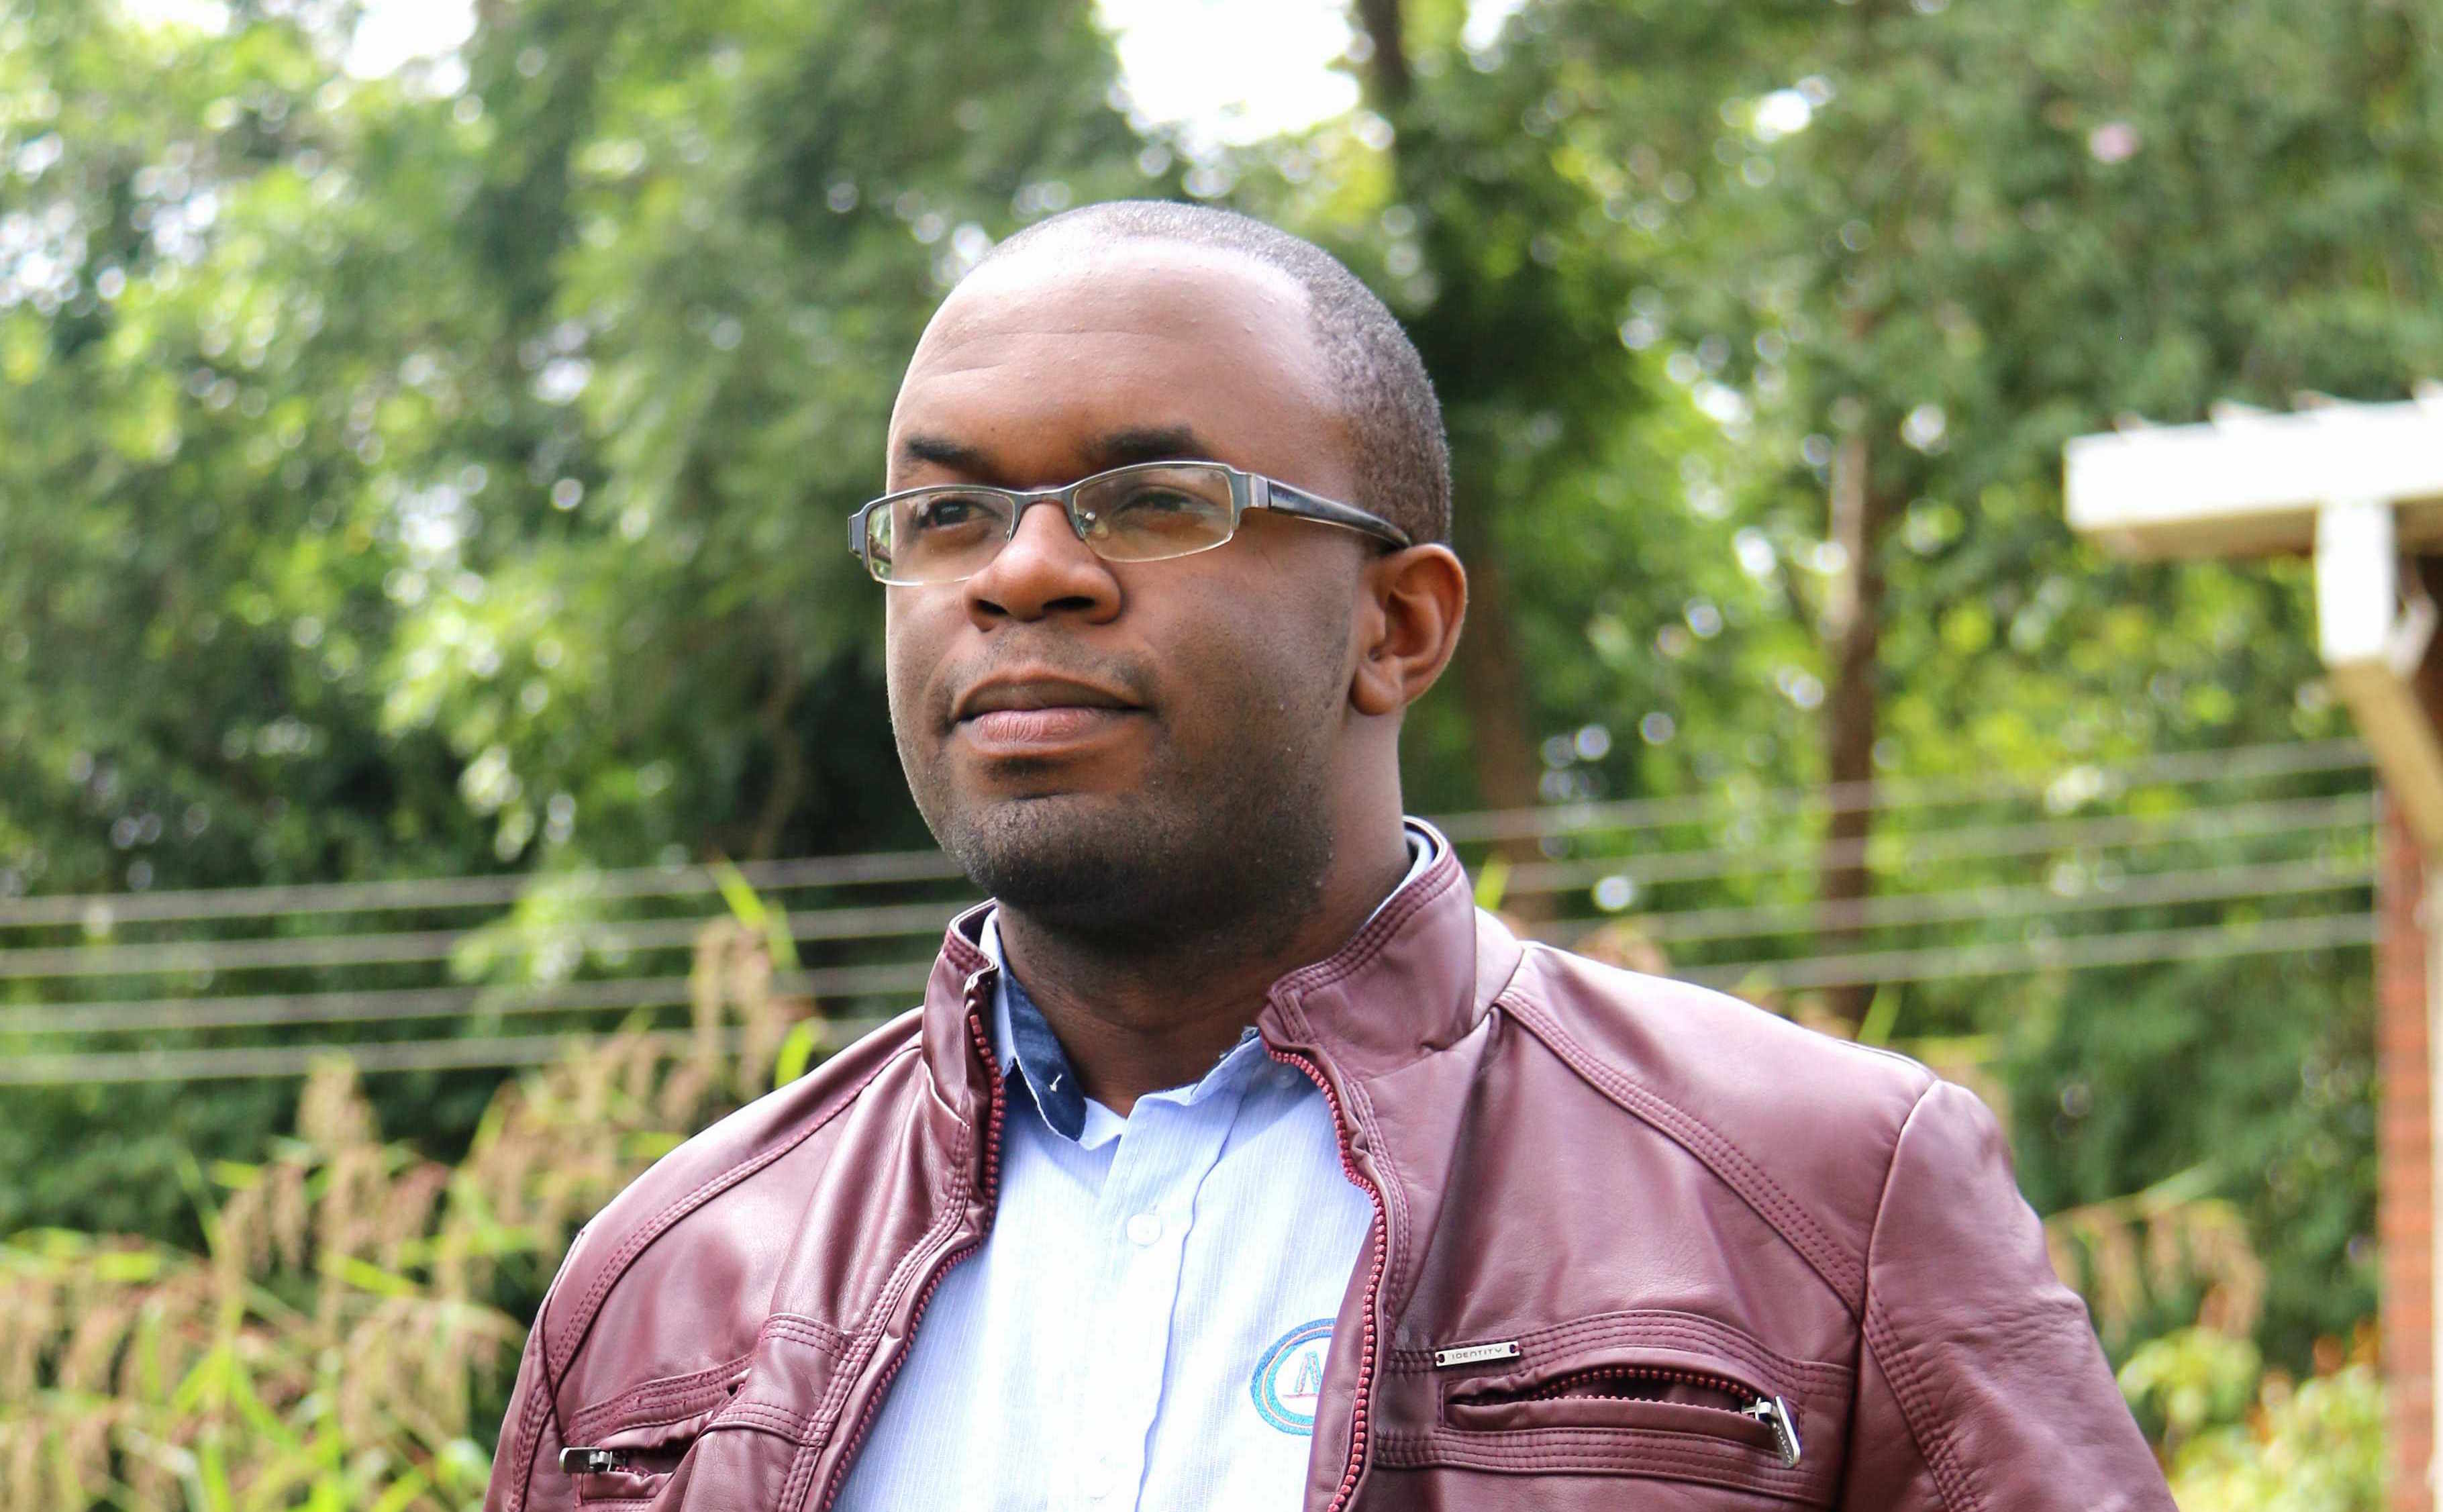 Charles Lipenga from Malawi is OD Young Person of the Month – May 2016